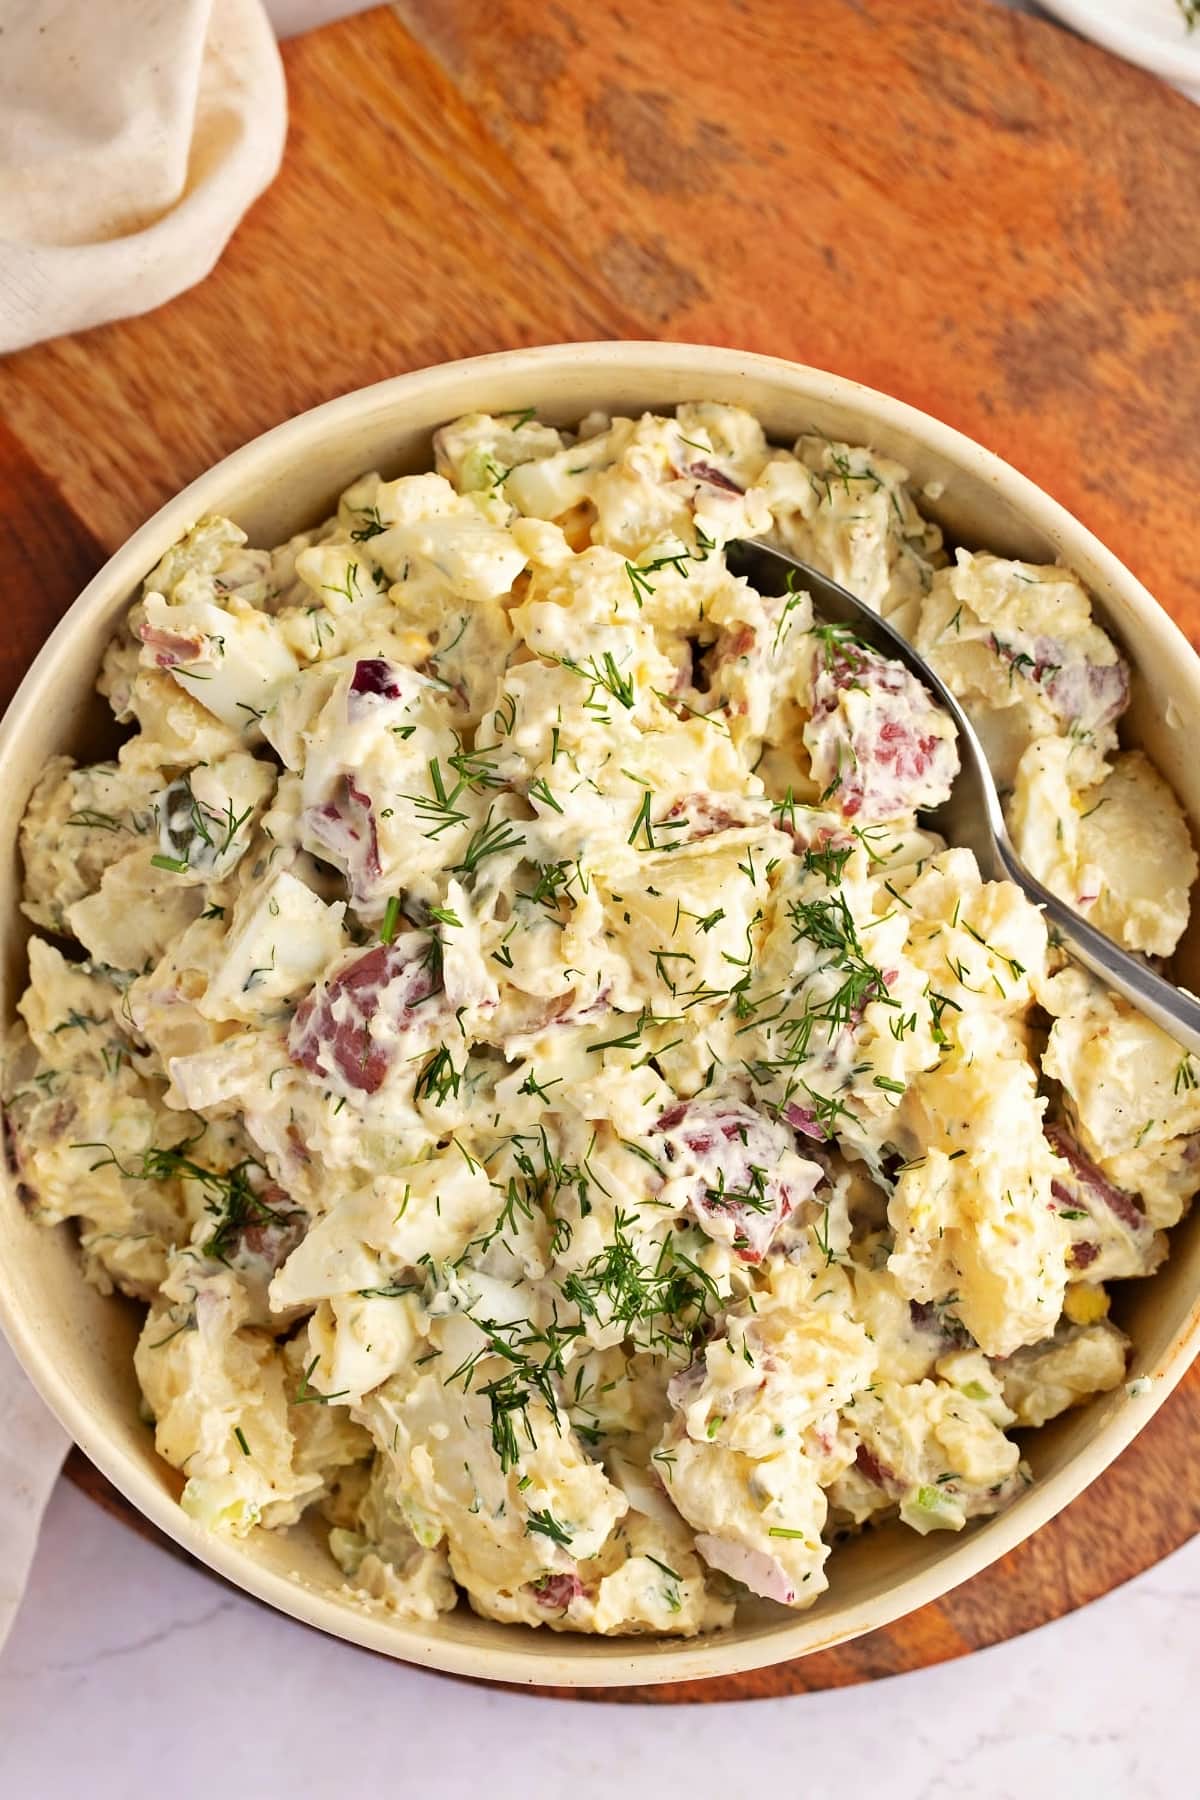 Bowl of Homemade Red Potato Salad with Fresh Rosemary on Top